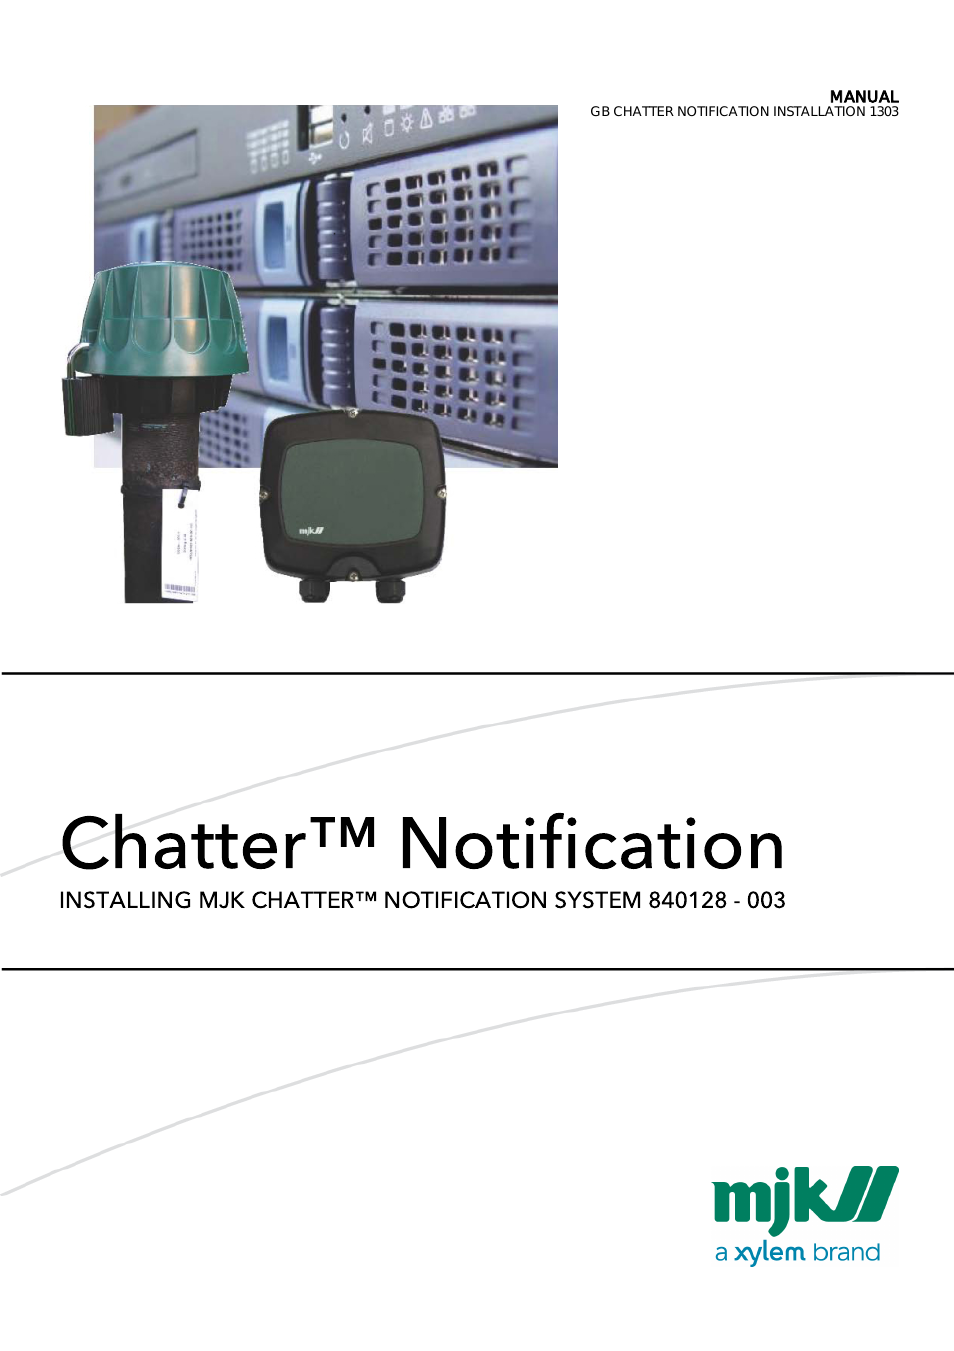 CHATTER Notification System install guide